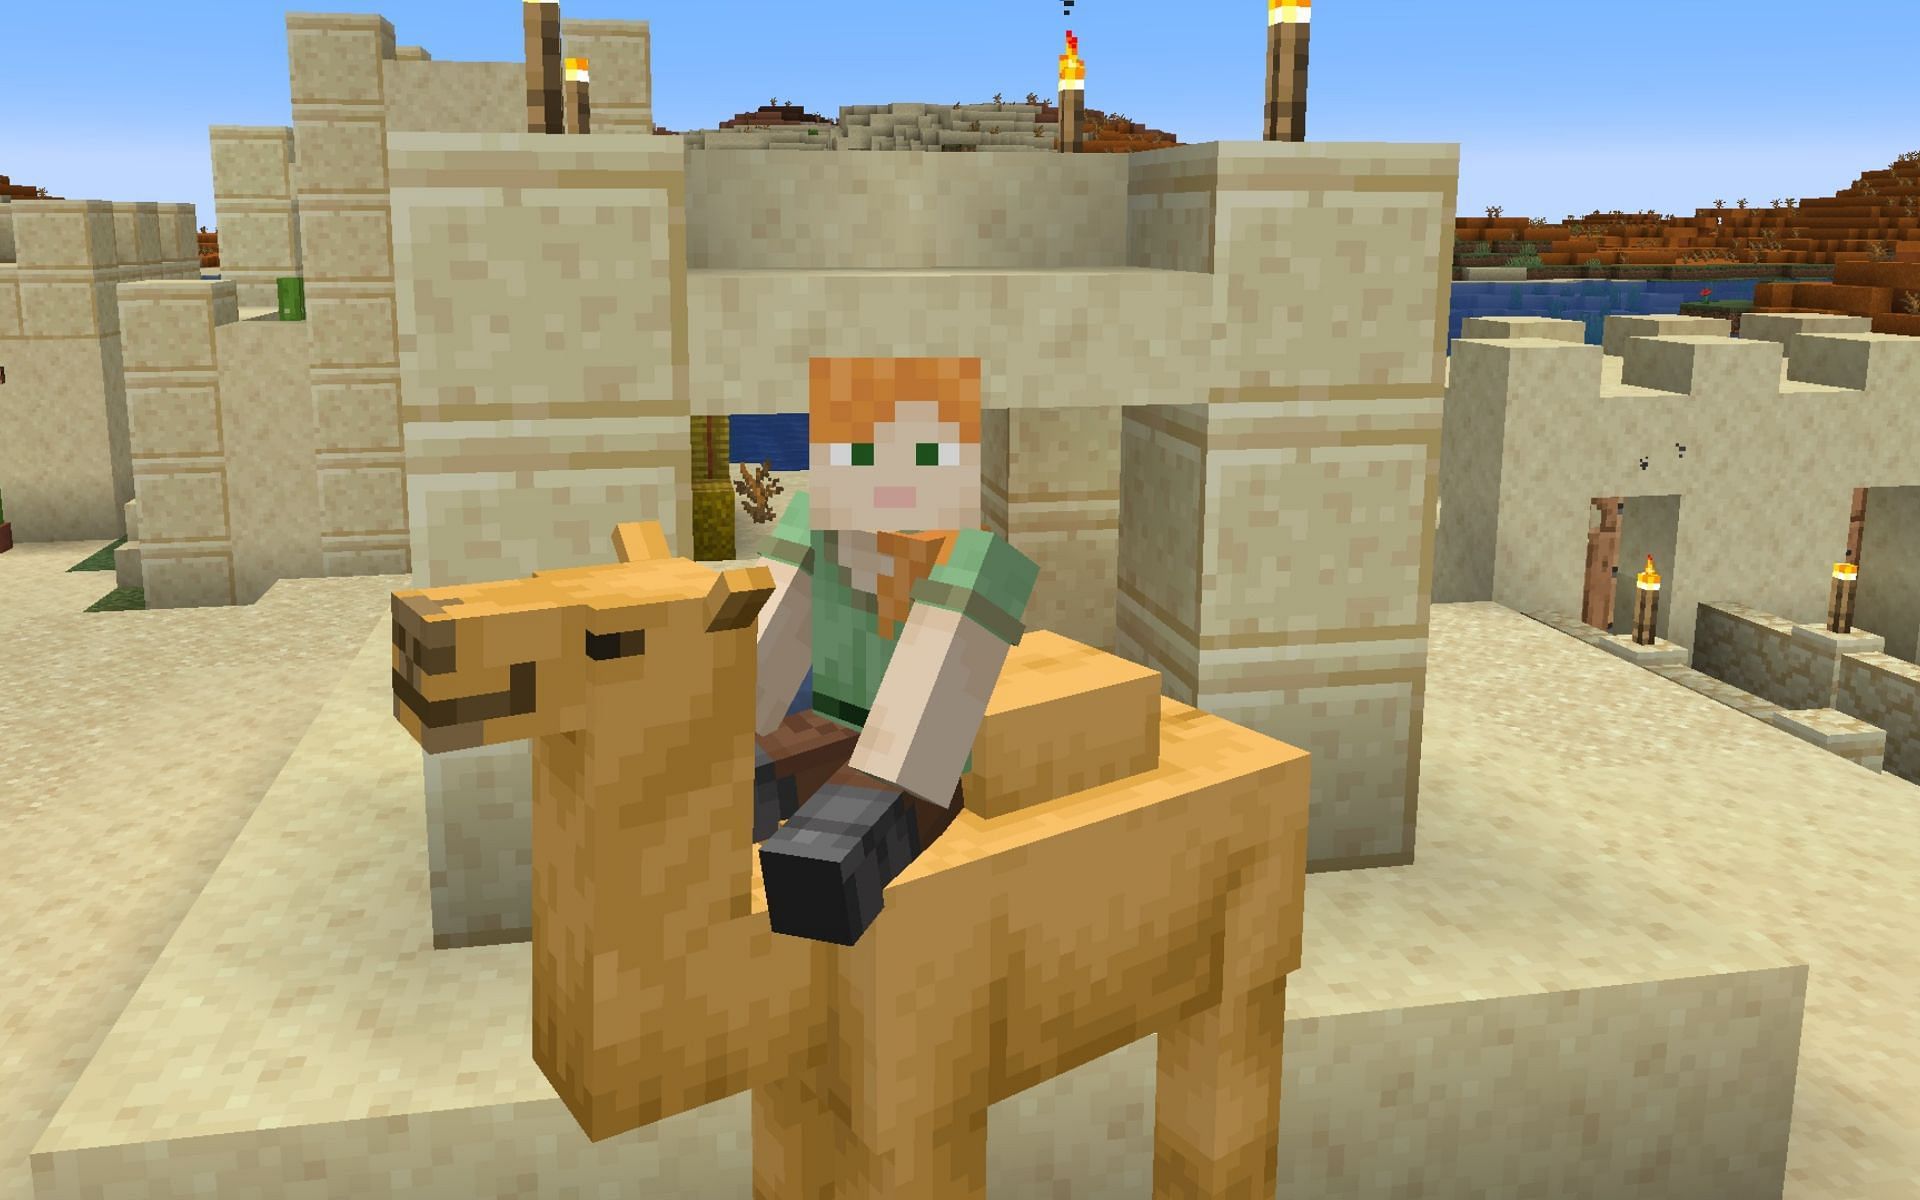 Camels are the newest addition to Minecraft (Image via Mojang)